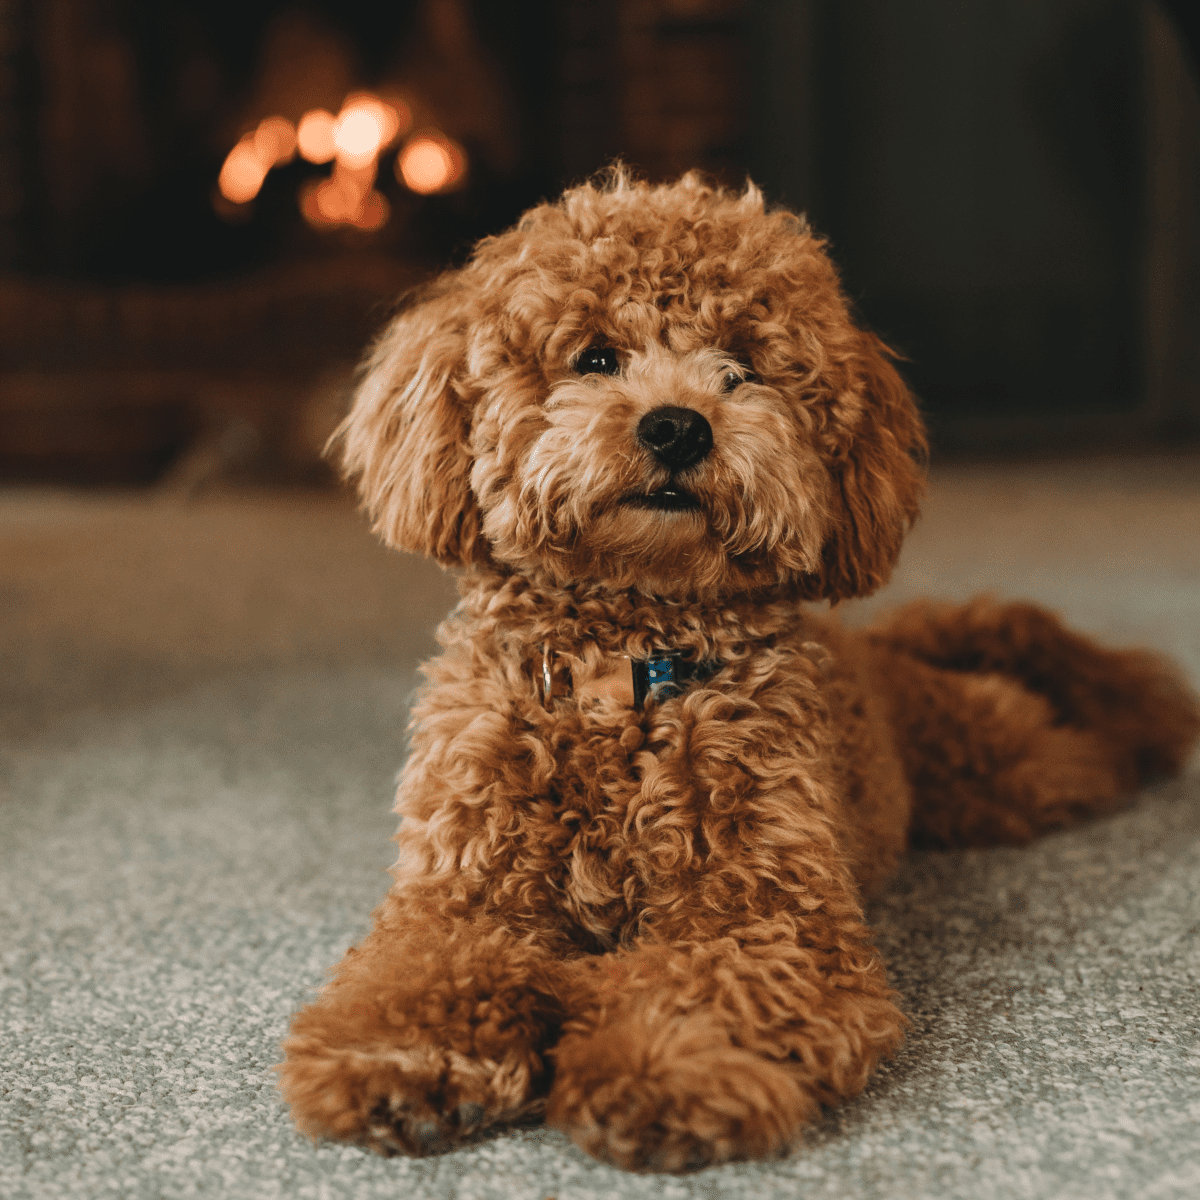 what breeds can you mix with a poodle? 2